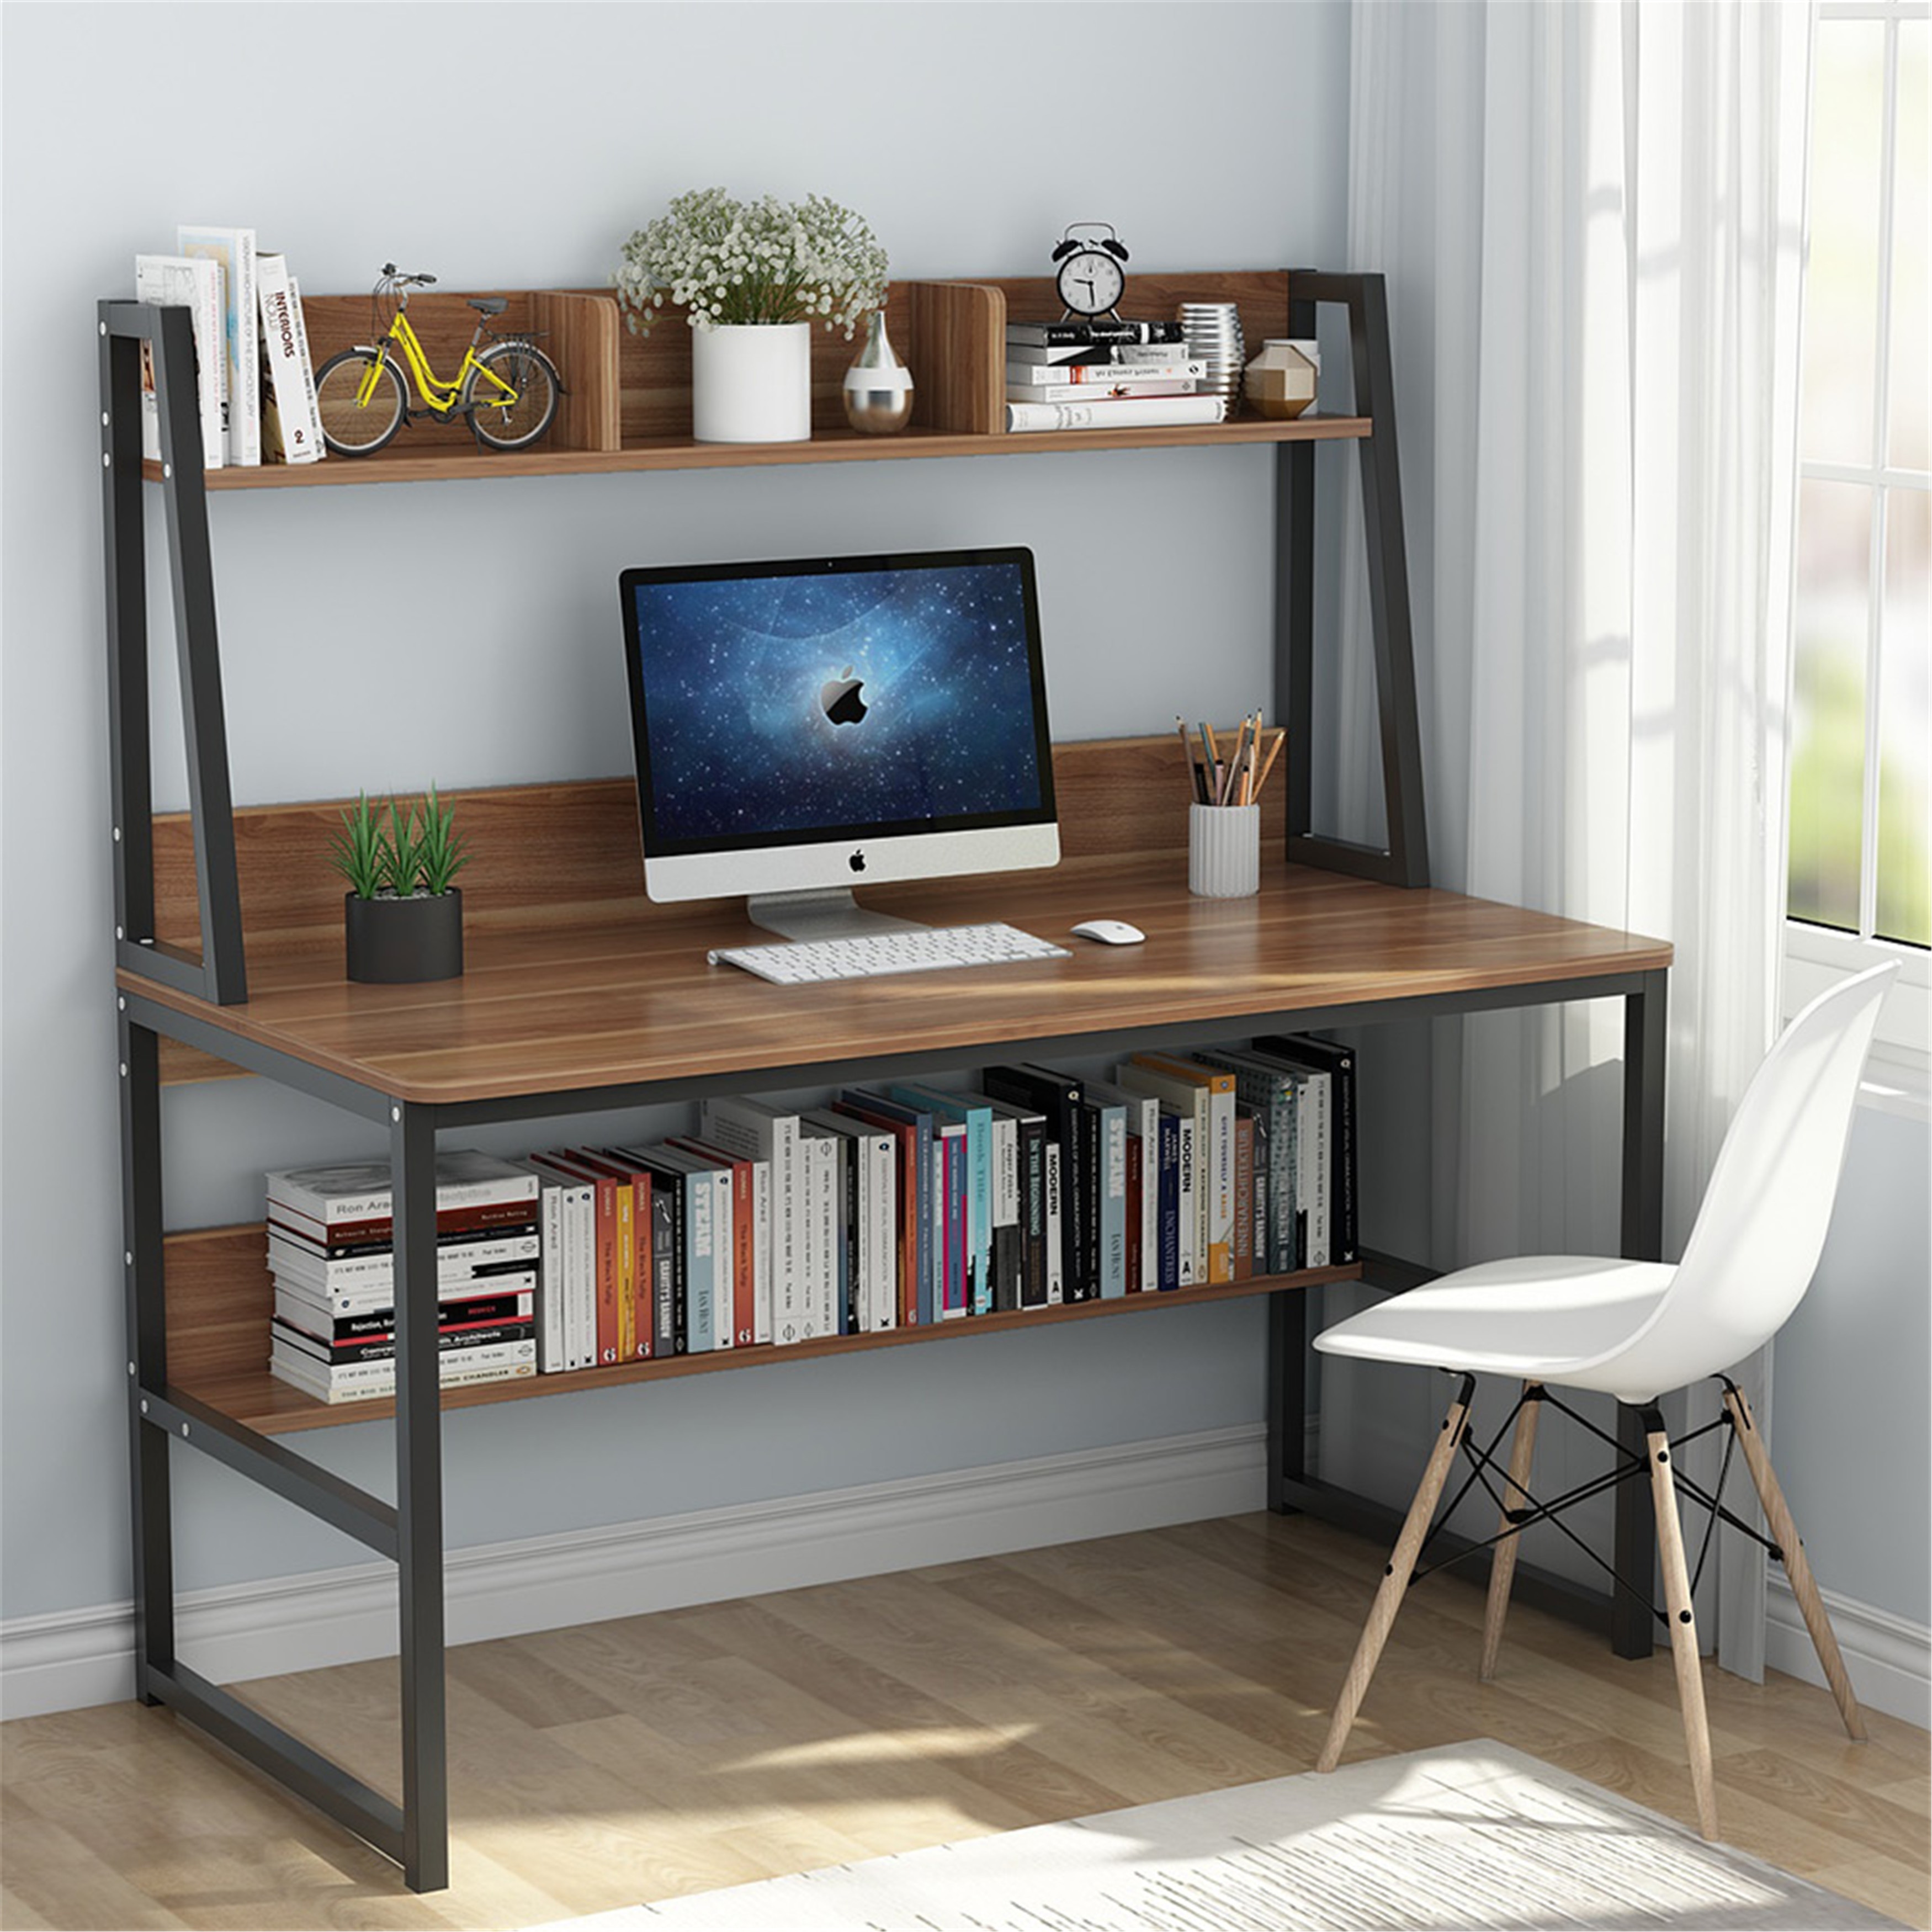 https://ak1.ostkcdn.com/images/products/is/images/direct/2d015c1349d8580dee52b9ec8cc7cd259b0720bf/47%22-Computer-Desk-with-Hutch-and-Bookshelf.jpg